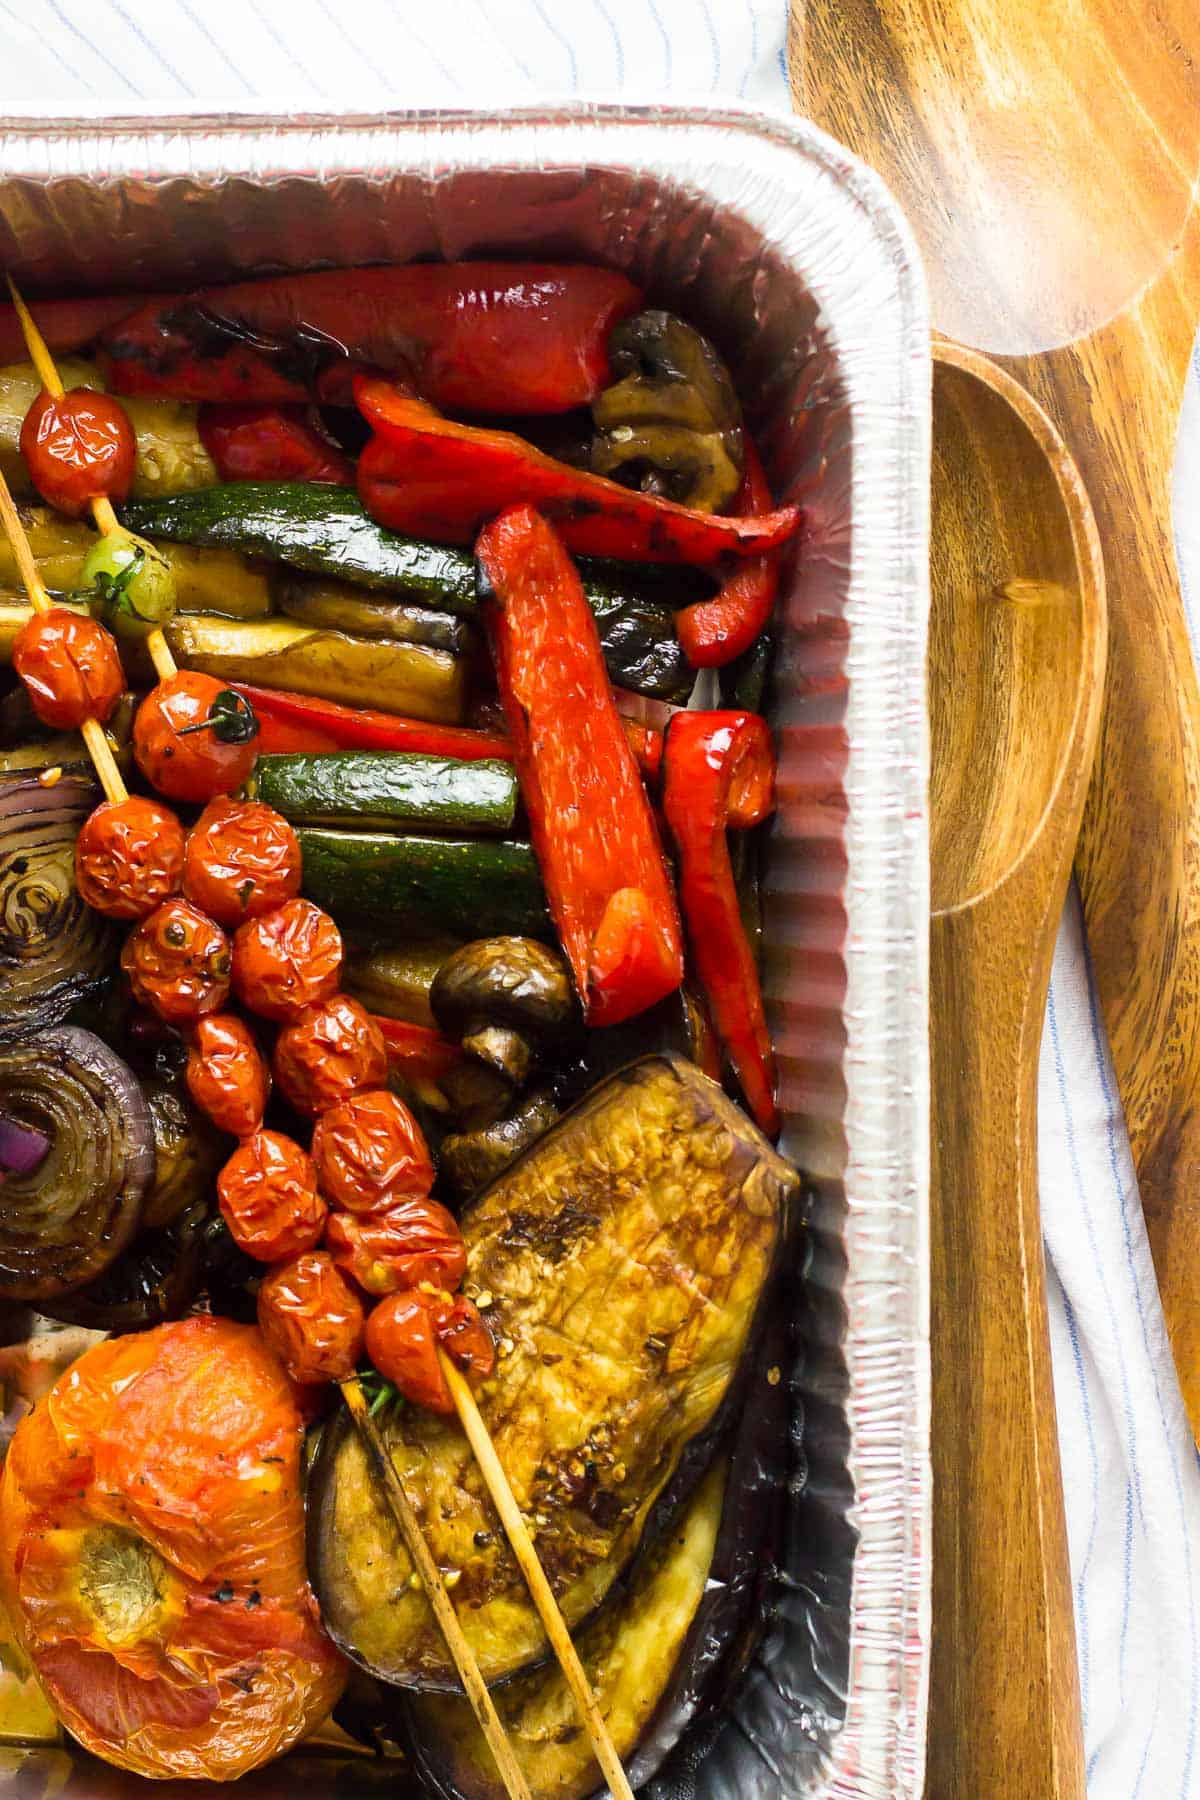 Grilled vegetables in a foil container with wooden servers on the side.